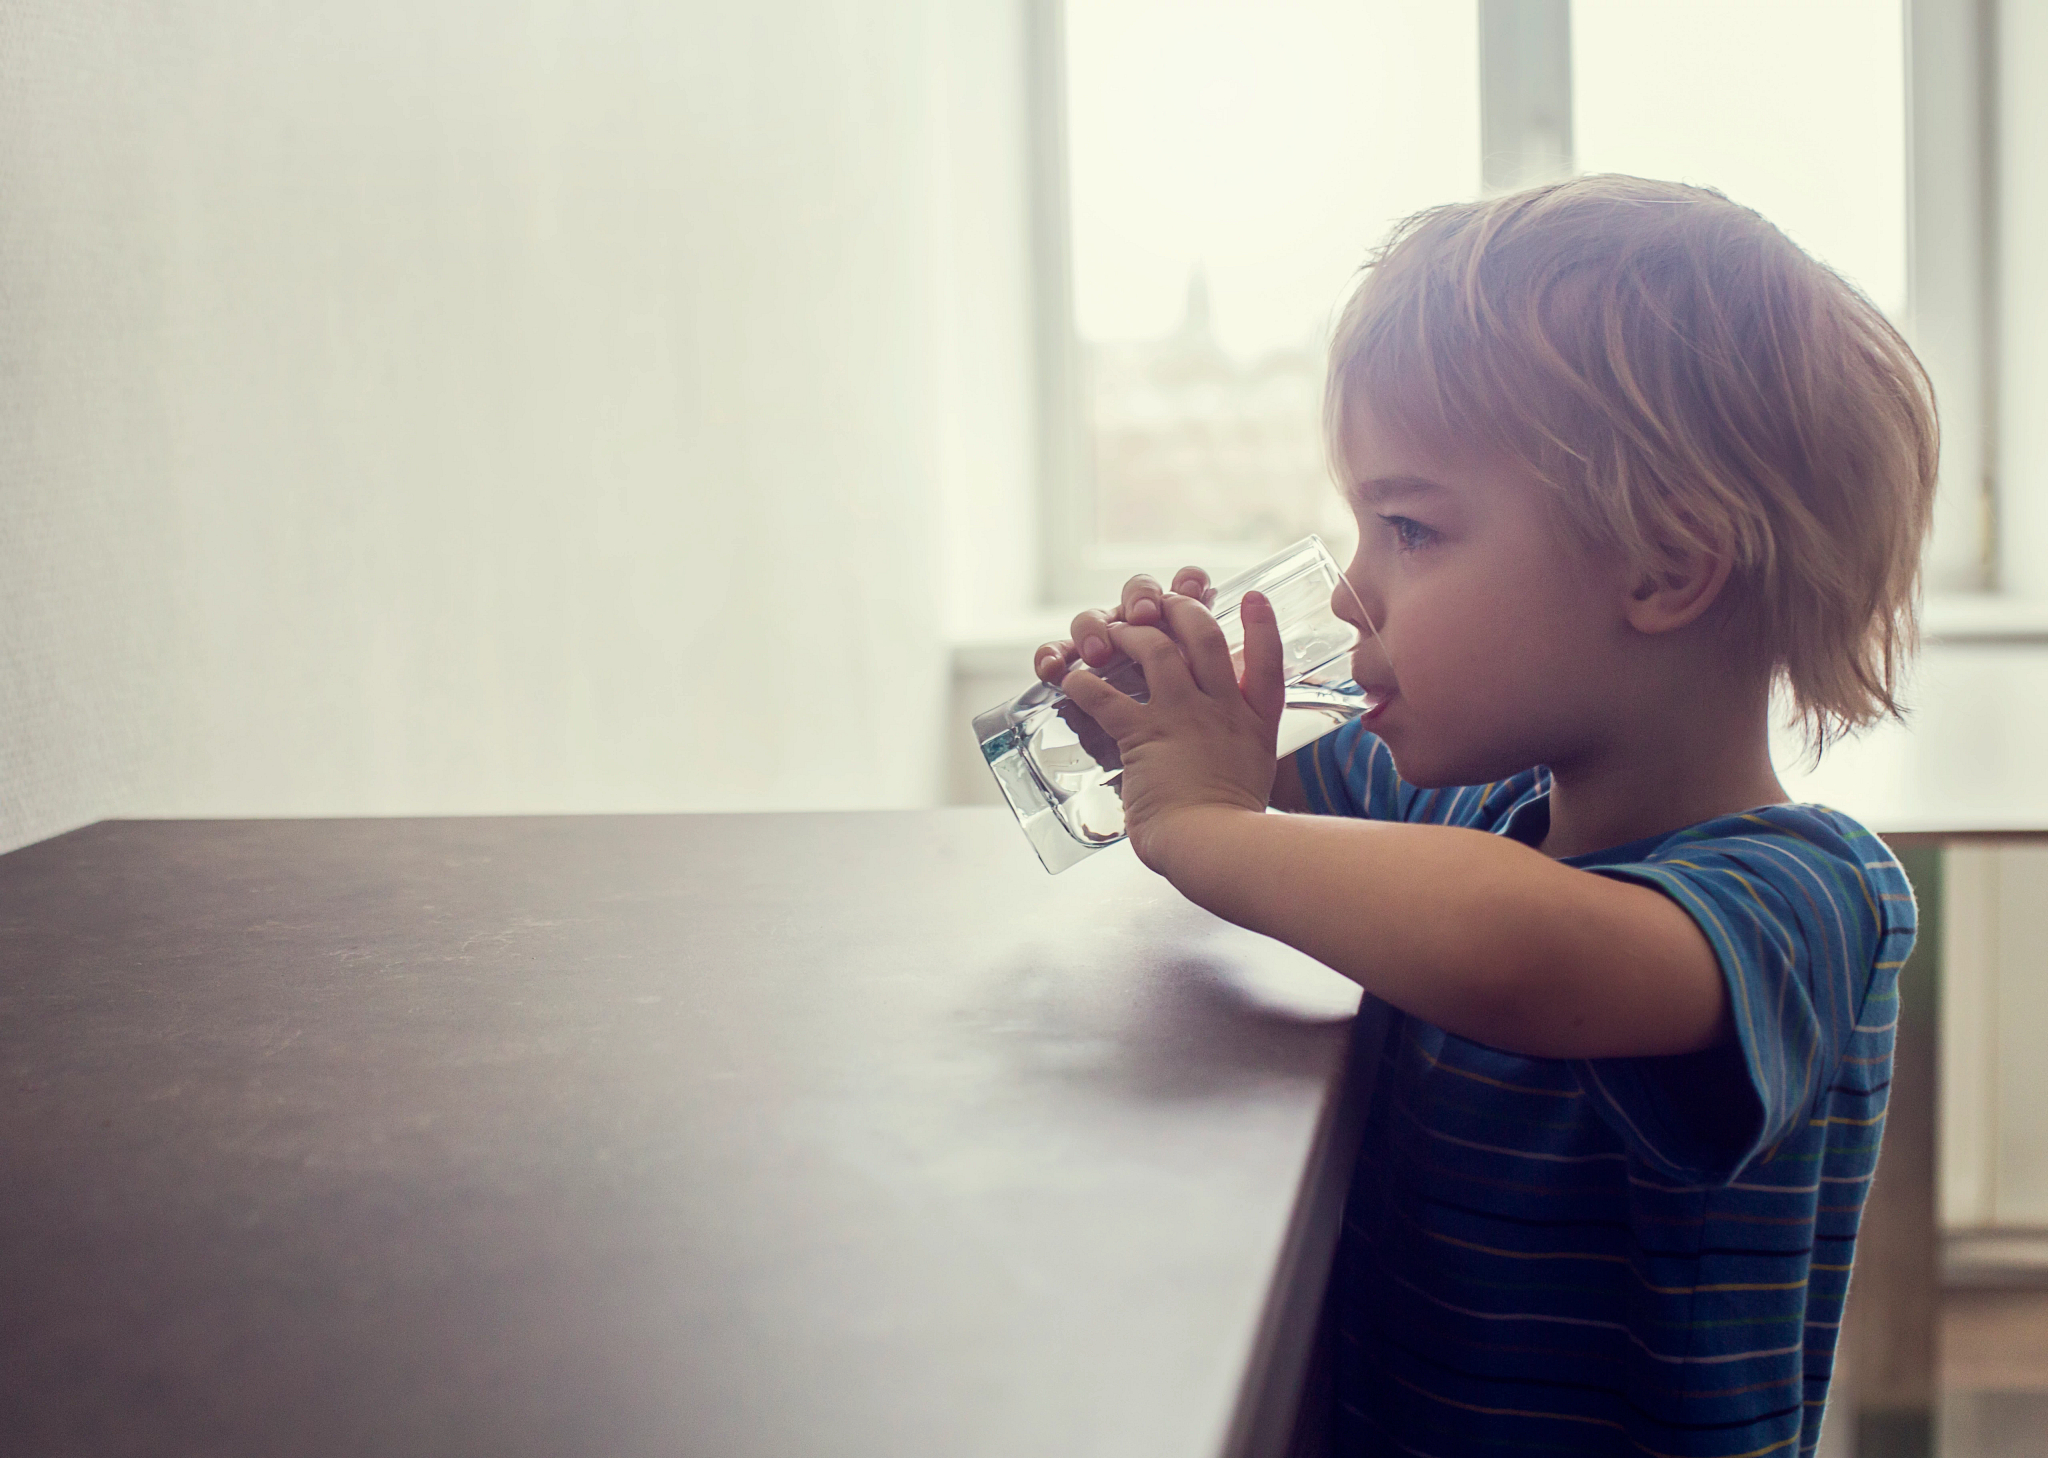 Early Childhood Exposure to Lead in Drinking Water Associated with Increased Teen Delinquency Risk